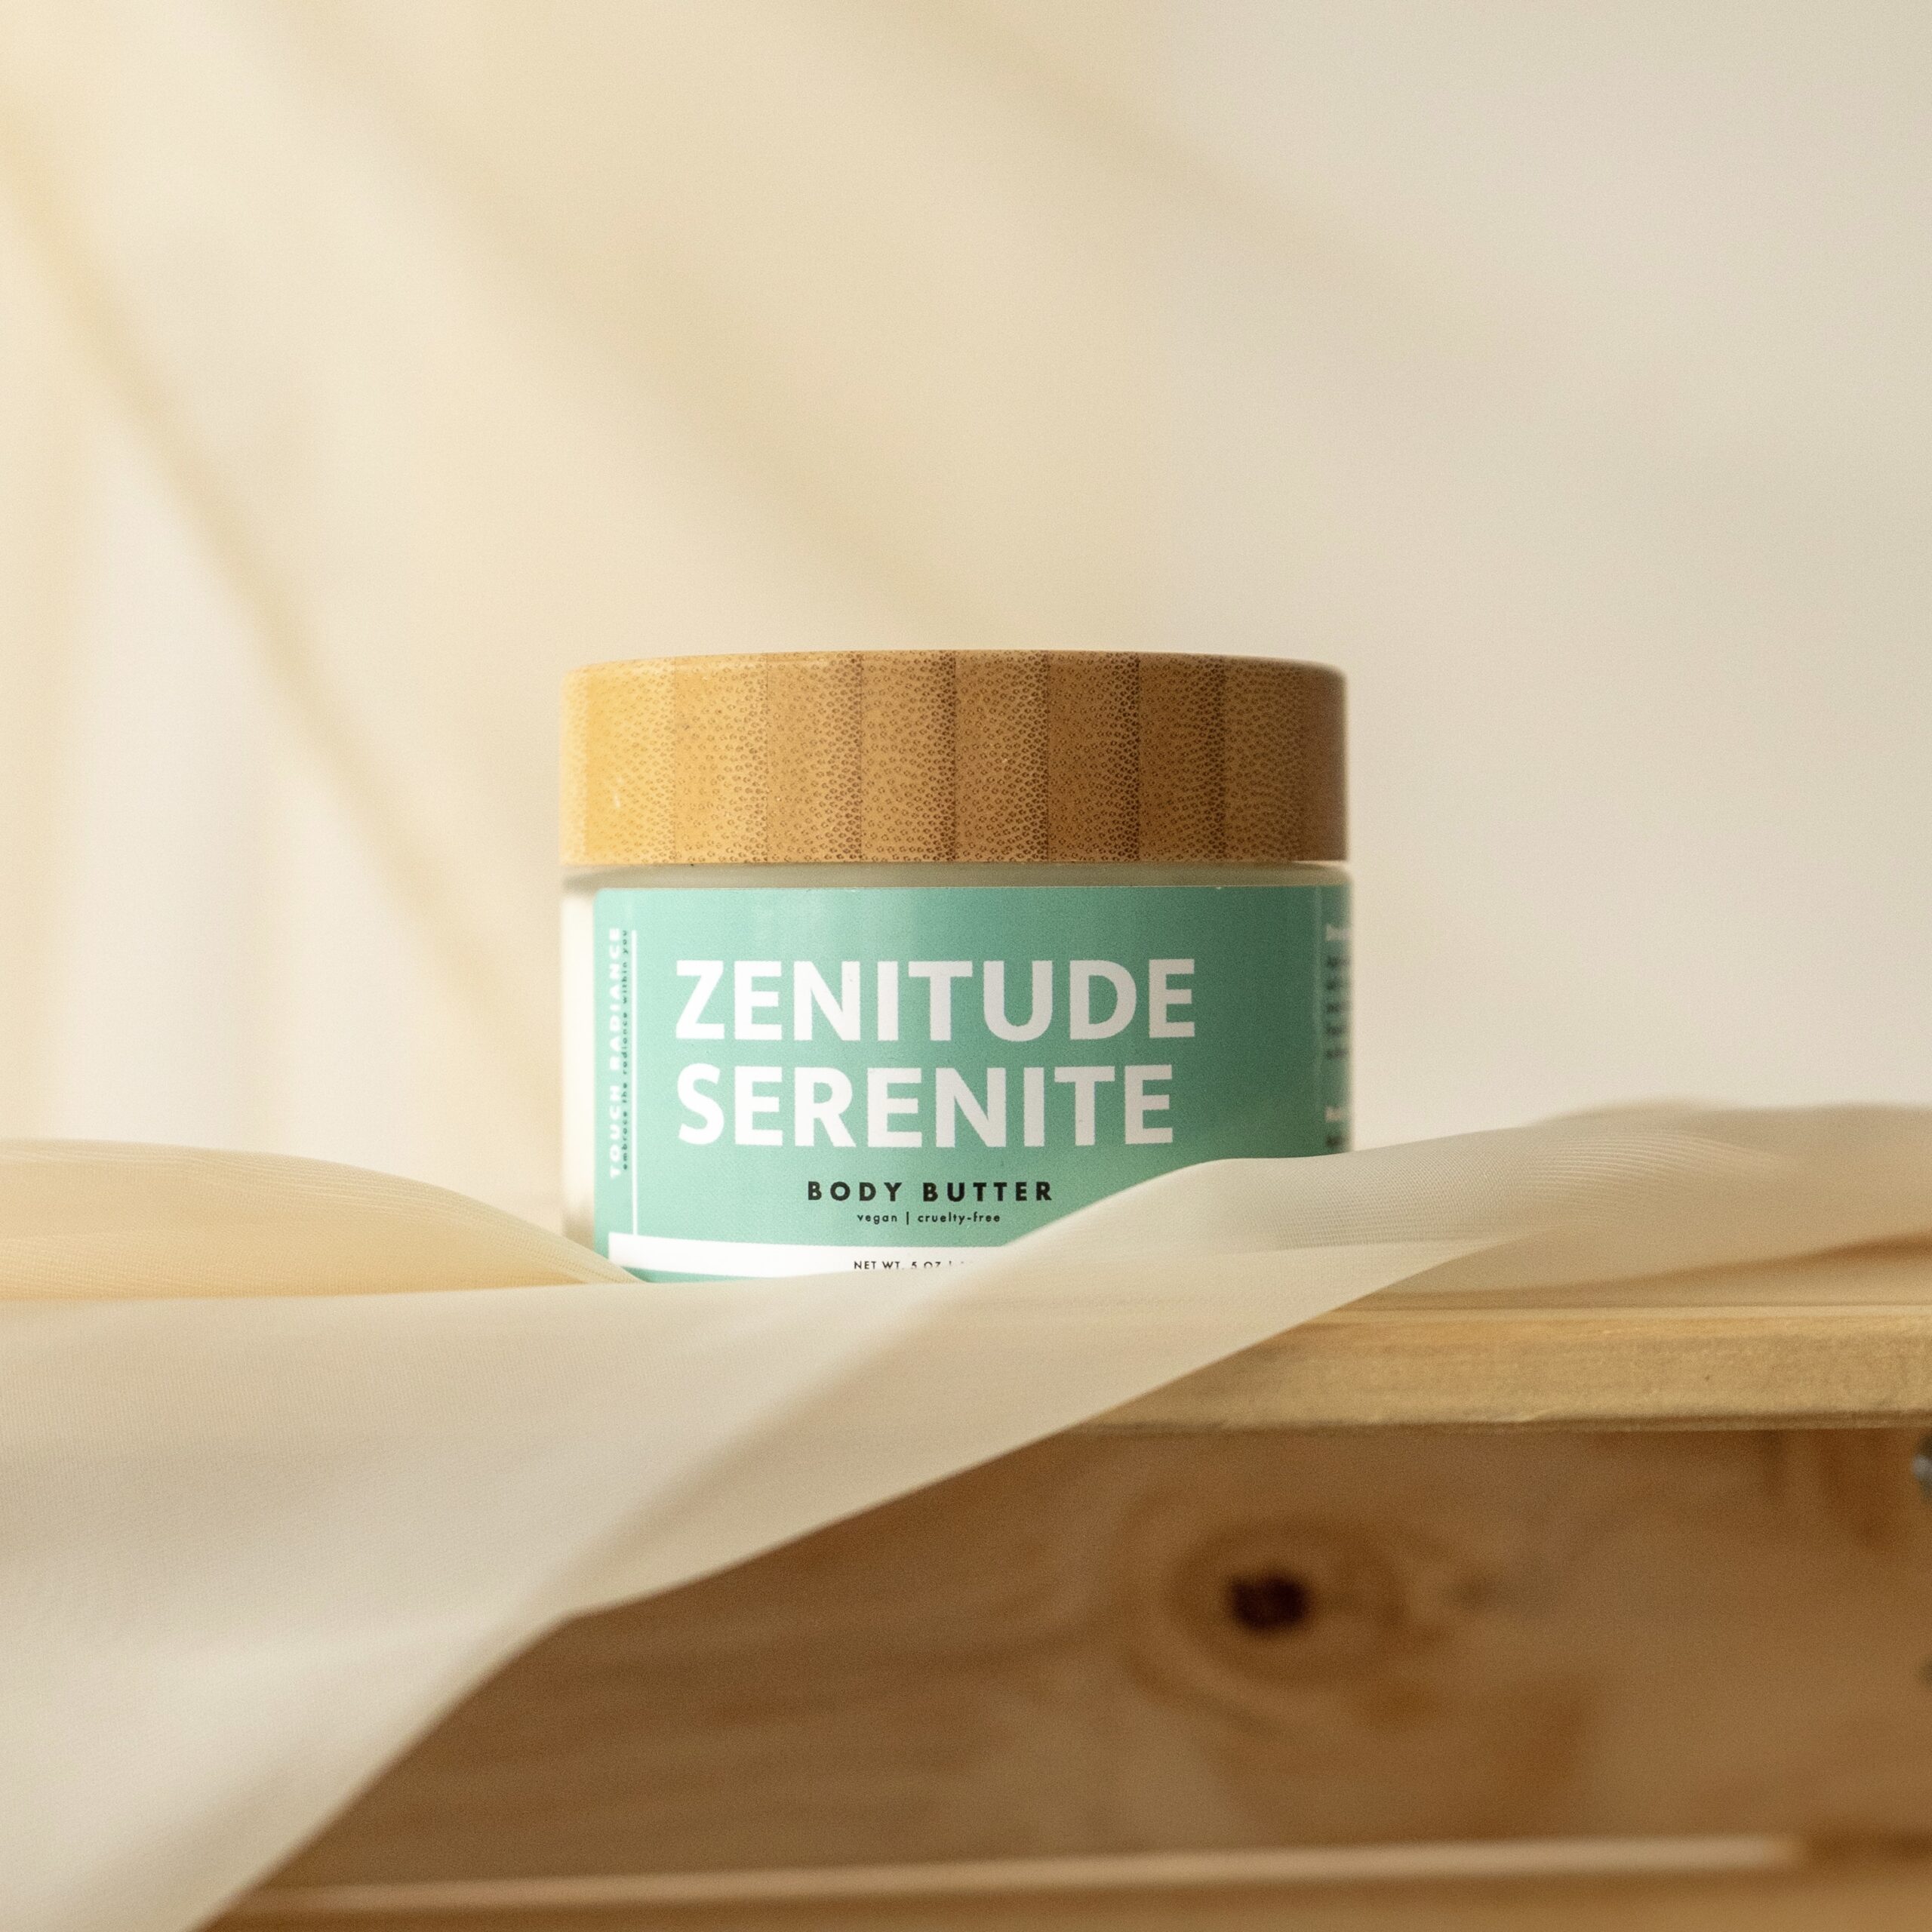 Introducing ZENITUDE SERENITE Body Butter - FOR DRY AND SENSITIVE SKIN, ECZEMA-FRIENDLY FOR DRY AND SENSITIVE SKIN - ECZEMA SKIN-FRIENDLY Black Women, Asian Women, BIPOC Woman Improve your skin barrier with Touch Radiance plant-based serums Woman-Owned Skincare Company Montreal Canada